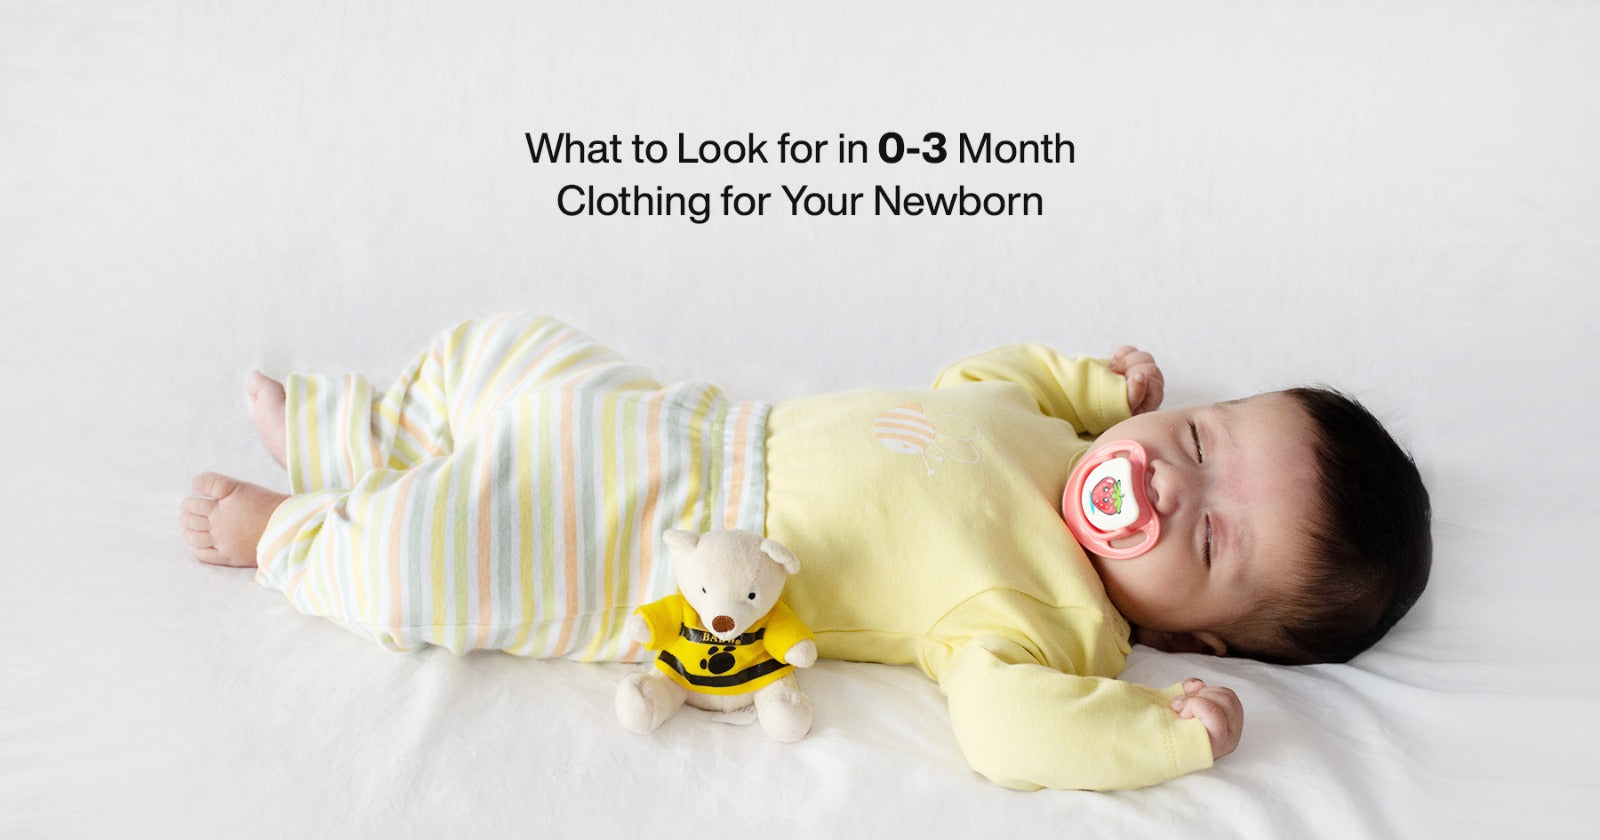 What to Look for in 0-3 Month Clothing for Your Newborn